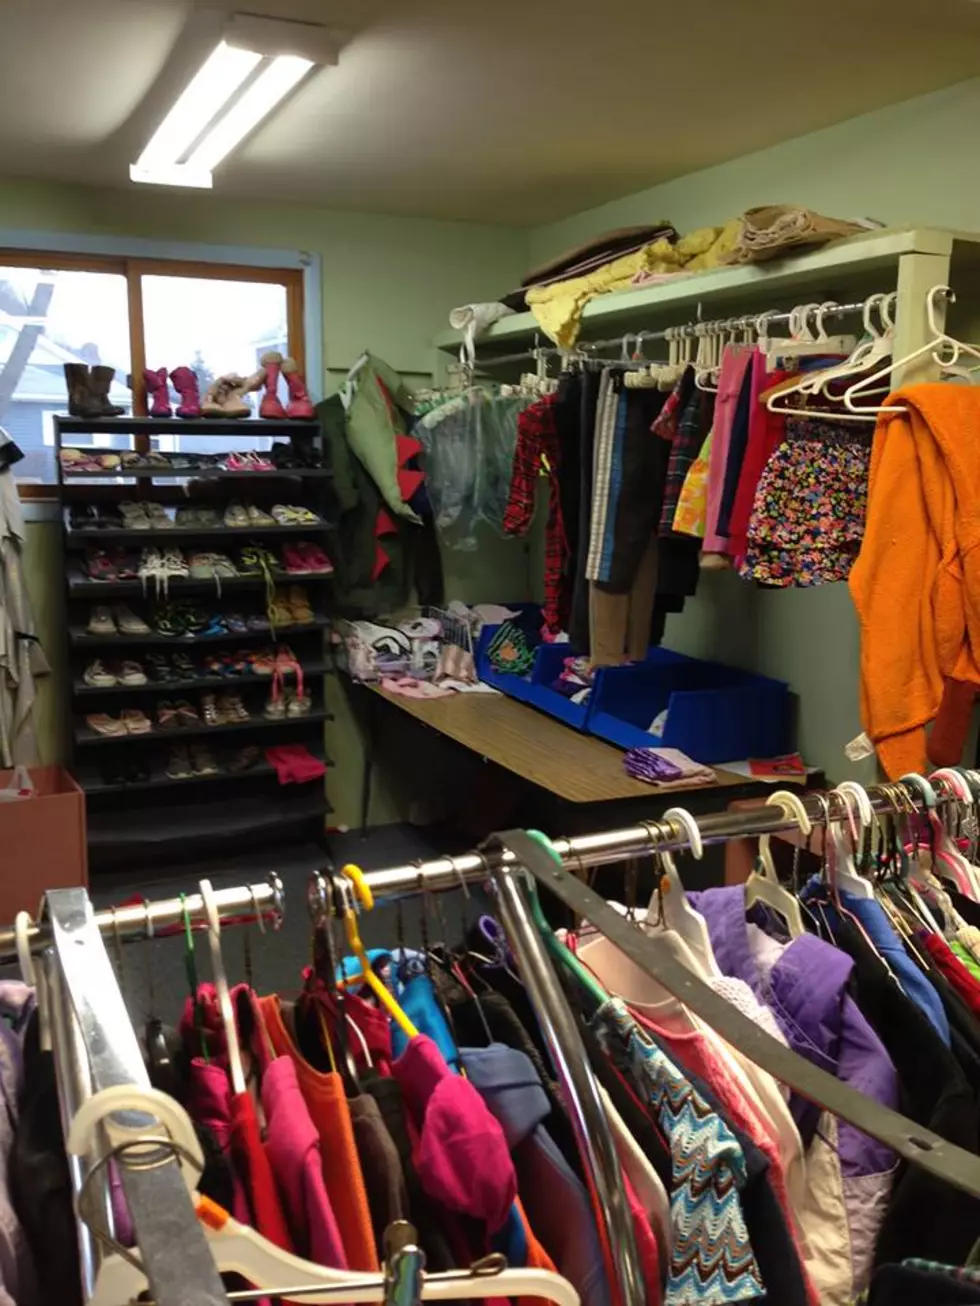 Binghamton’s Project Concern Helps With Clothes, Food And Household Items